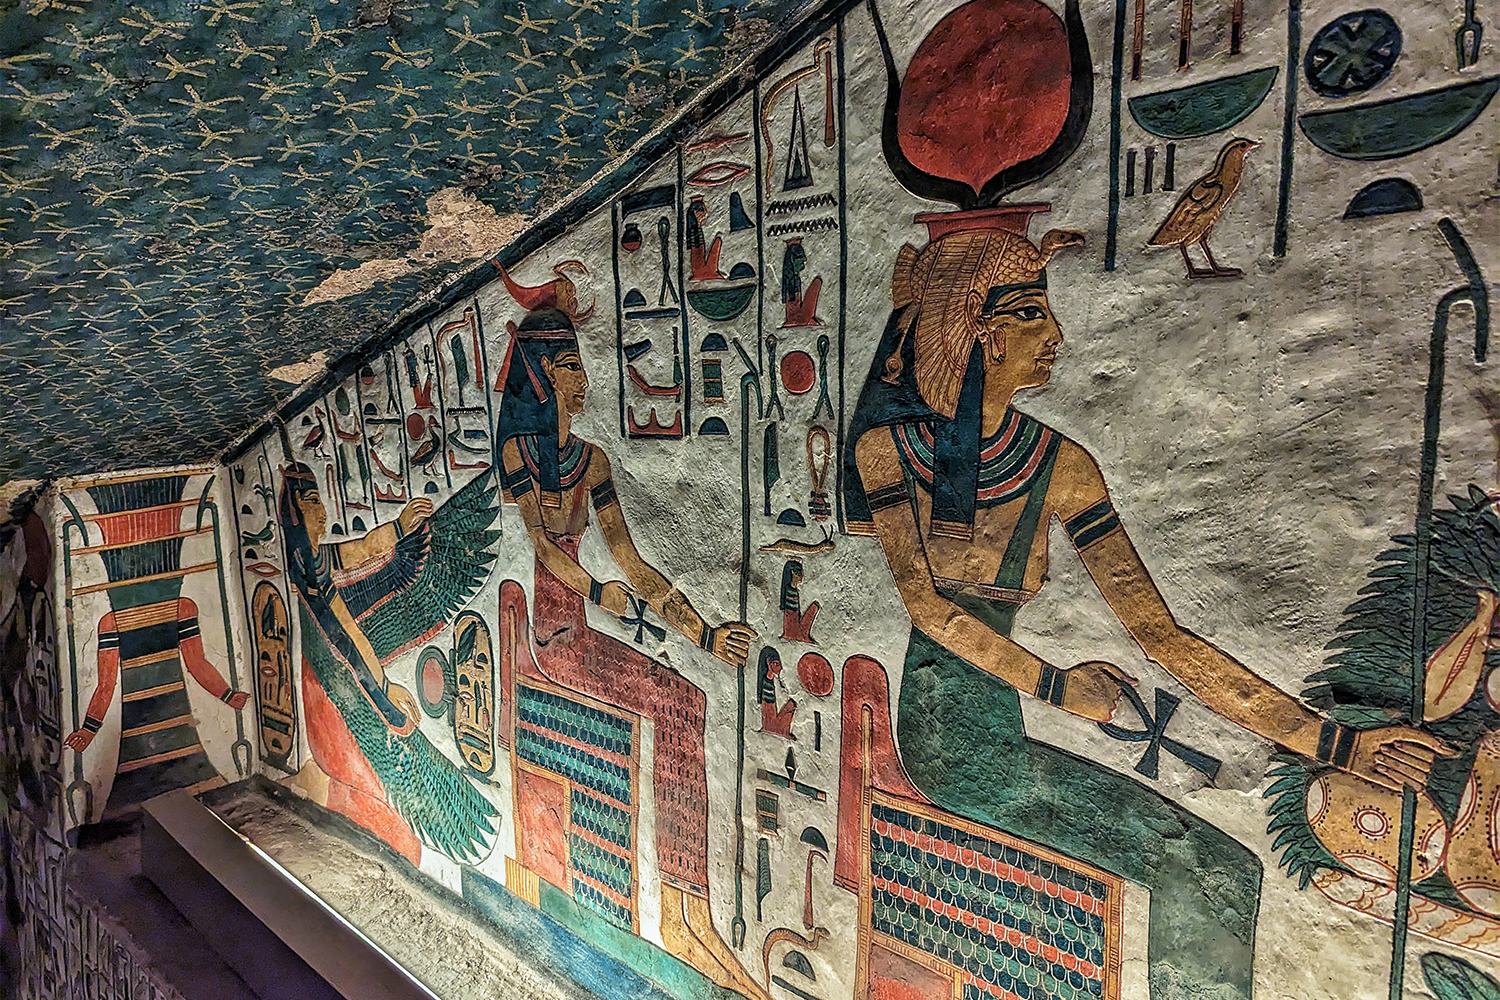 Paintings and hieroglyphics in Egyptian tombs